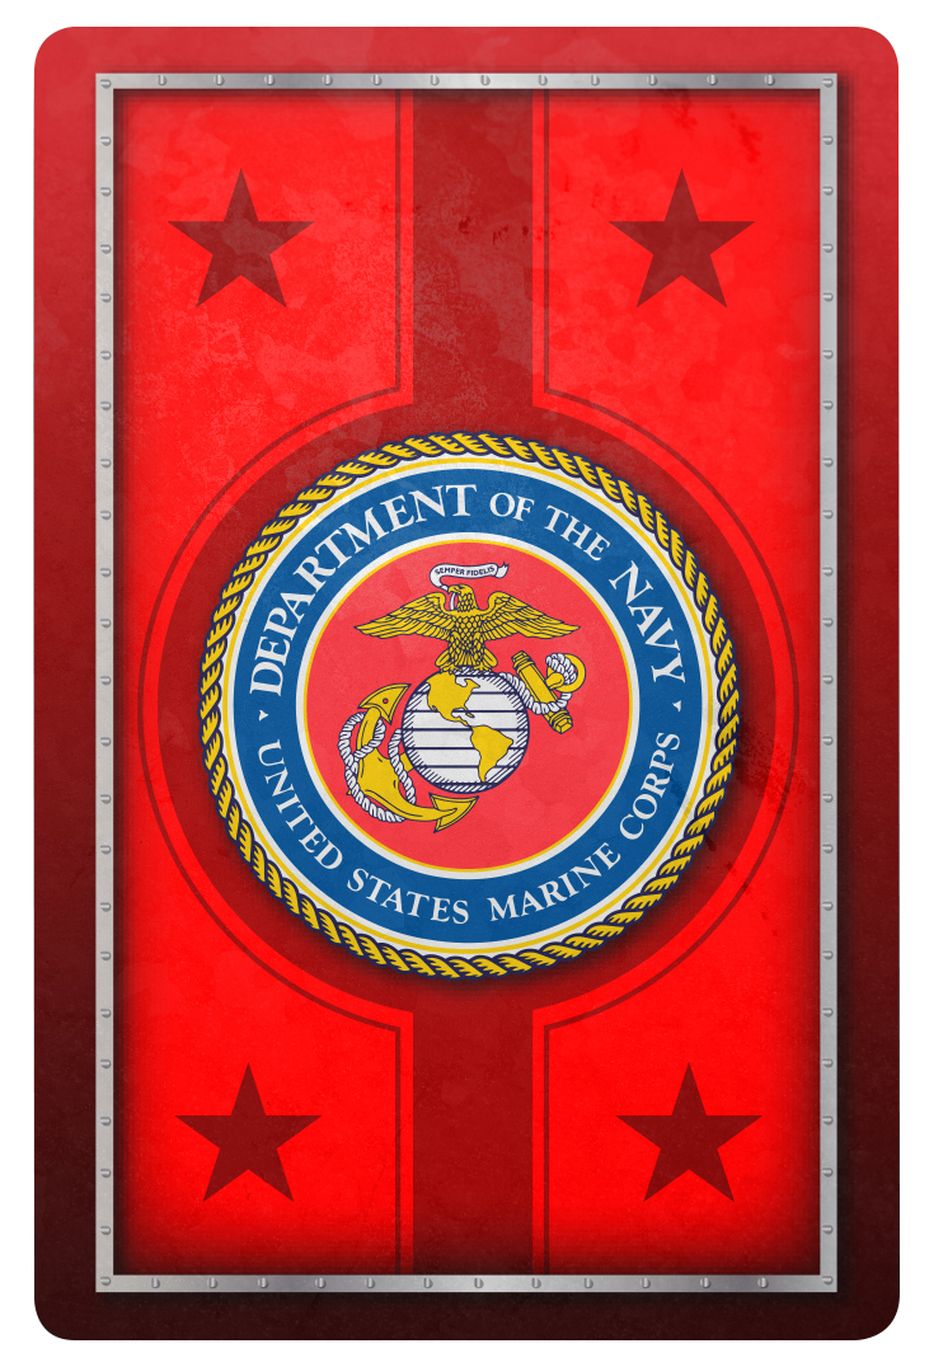 Allied Products Heroes Series Marine Corps Medallion Small Magnet 2.5" diam... 